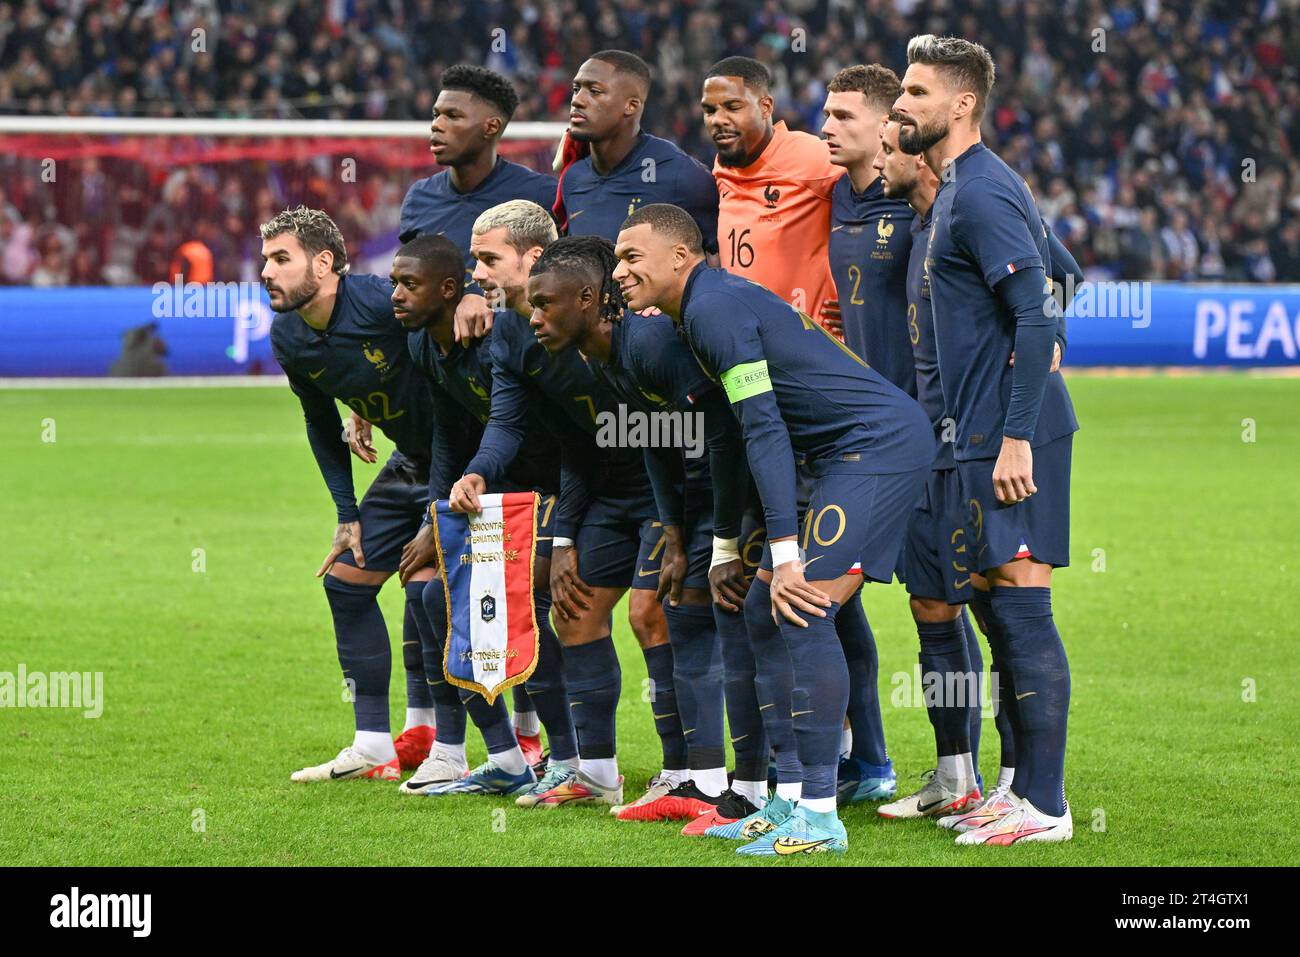 players of France with Aurelien Tchouameni (8) of France, Ibrahima Konate (13) of France, Goalkeeper Mike Maignan (16) of France, Benjamin Pavard (2) of France, Jonathan Clauss (3) of France, Olivier Giroud (9) of France, Theo Hernandez (22) of France, Ousmane Dembele (11) of France, Antoine Griezmann (7) of France, Eduardo Camavinga (6) of France and Kylian Mbappe (10) of France pose for a team photo during a soccer game between the national teams of France and Scotland in friendly game, on October 17, 2023 in Lille, France. (Photo by David Catry/Sportpix) Stock Photo